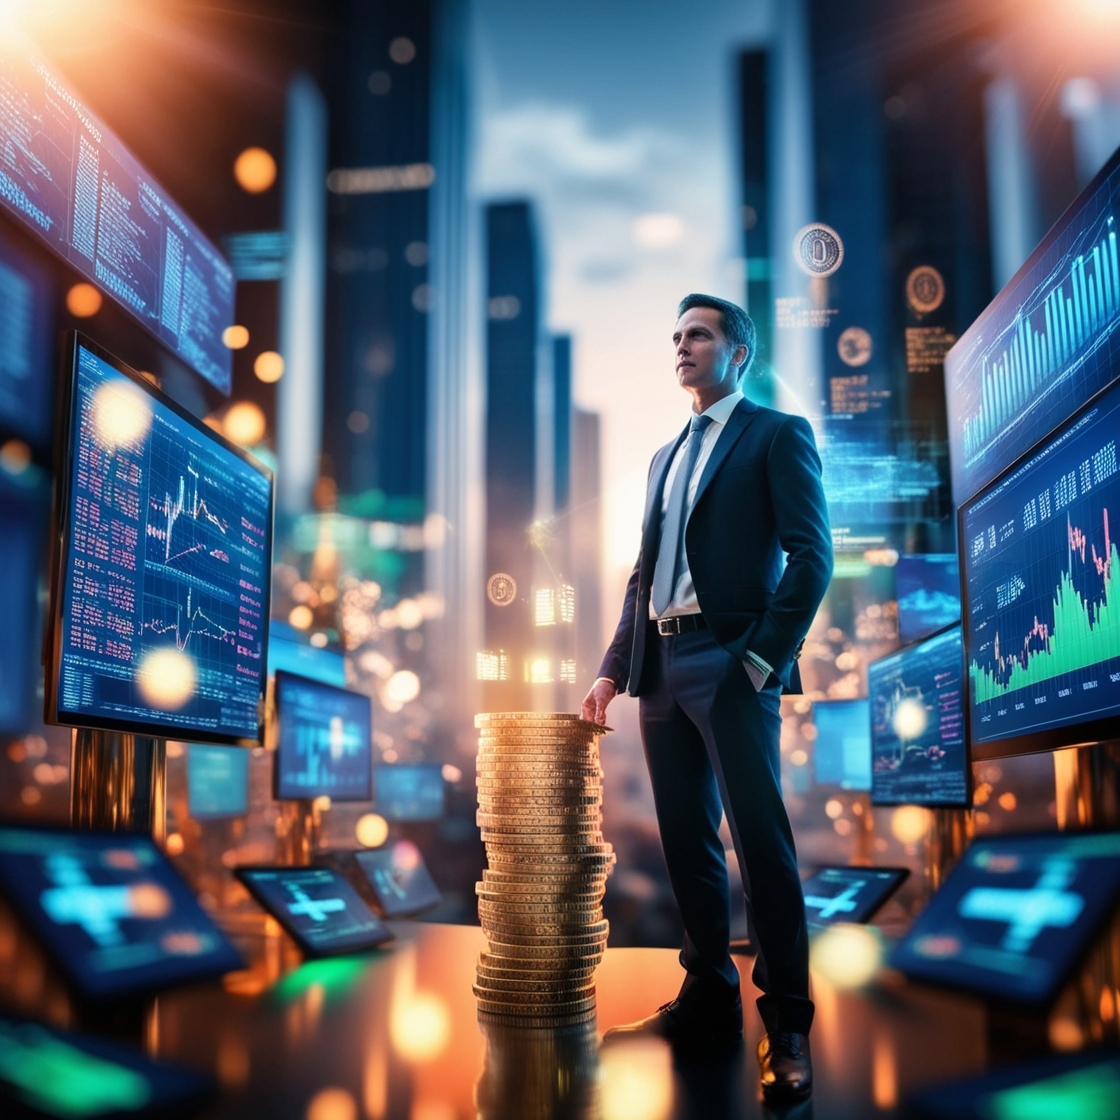 A cinematic photograph of investments in cryptocurrency, taken on medium format film, depicting a sleek, high-tech financial analyst standing amidst a blurred cityscape, surrounded by vibrant screens and data projections, exuding a sense of futurism and innovation, with warm golden lighting, deep blues, and neon greens dominating the color palette, accentuating the excitement and volatility of the cryptocurrency market, complete with subtle lens flares and a shallow depth of field to evoke a sense of sophistication and cutting-edge technology.